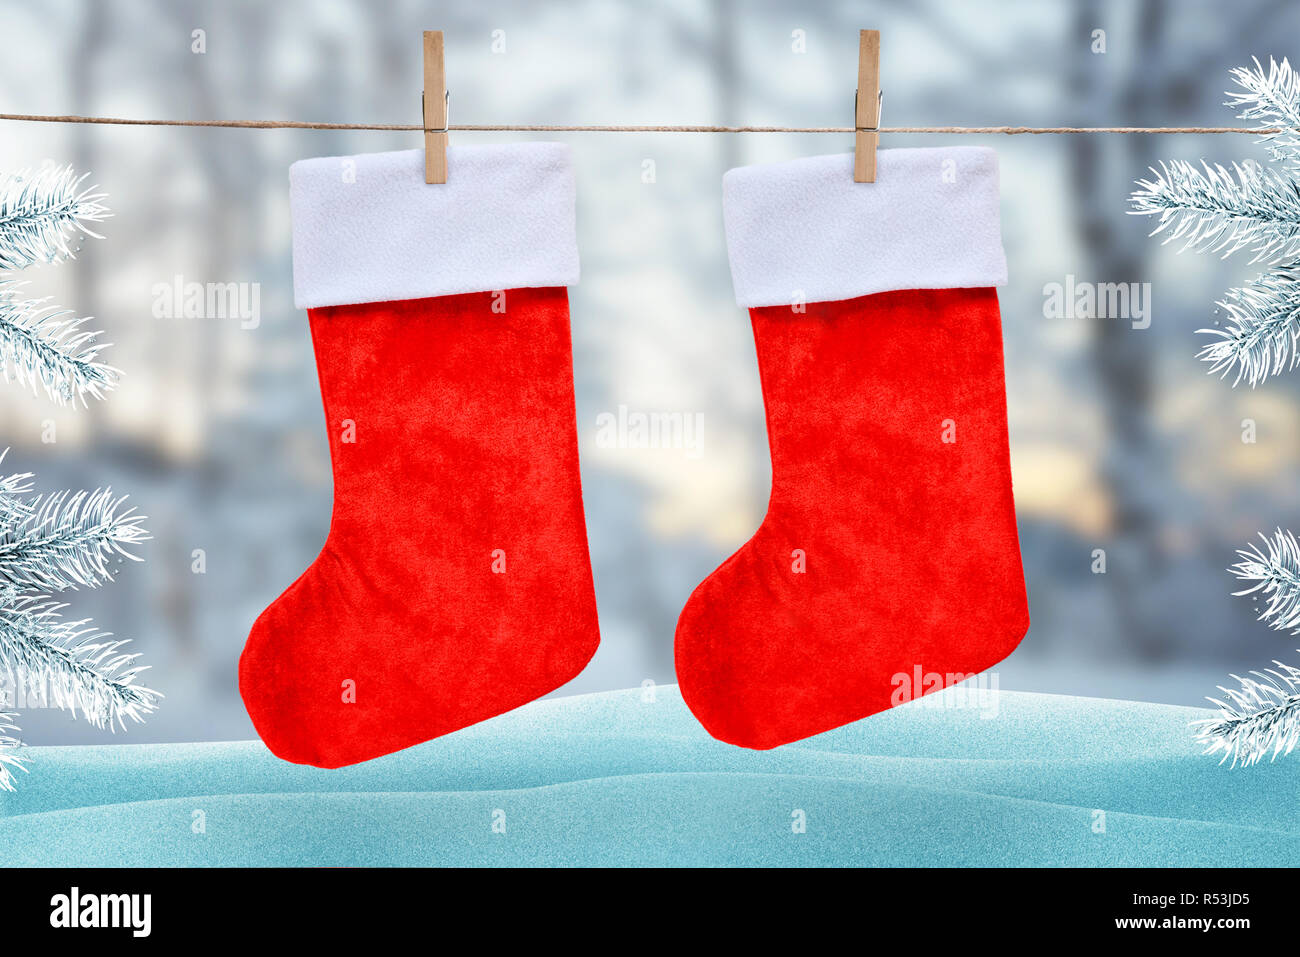 Christmas red socks hooked with a clip on a rope. Winter, snow scene with Christmas tree in background. Stock Photo